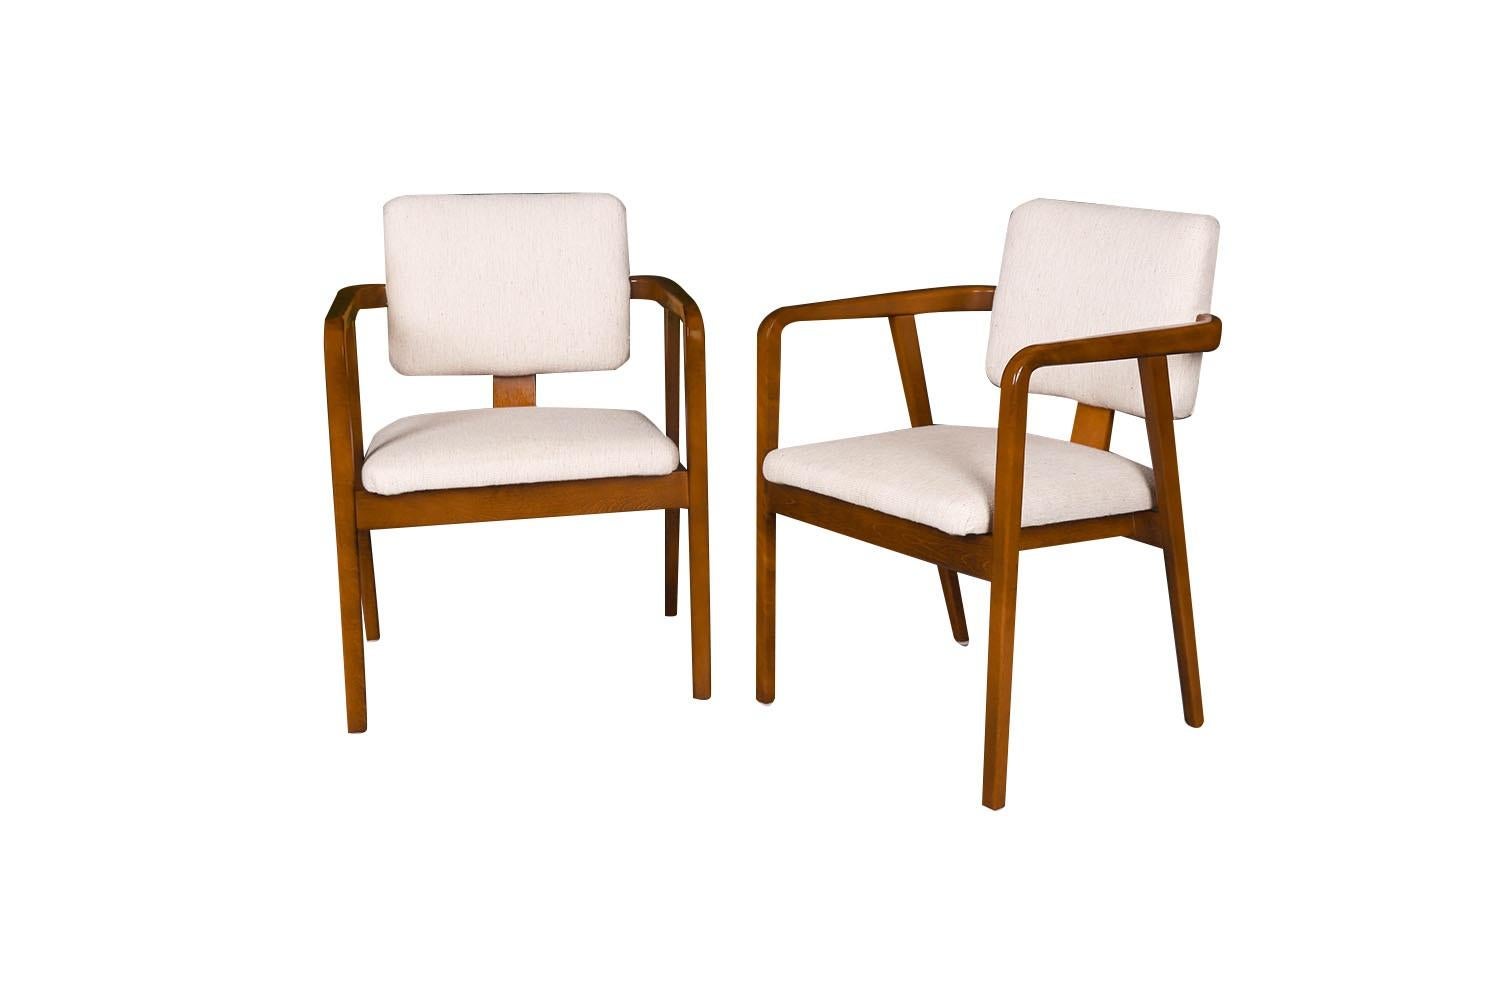 Remarkably, Iconic, stunning and extraordinarily rare set of six Model 4663 dining/side chairs, two armchairs and four side chairs by Earnest Farmer with George Nelson & Associates for Herman Miller, circa 1960. This classic and unique Mid-Century